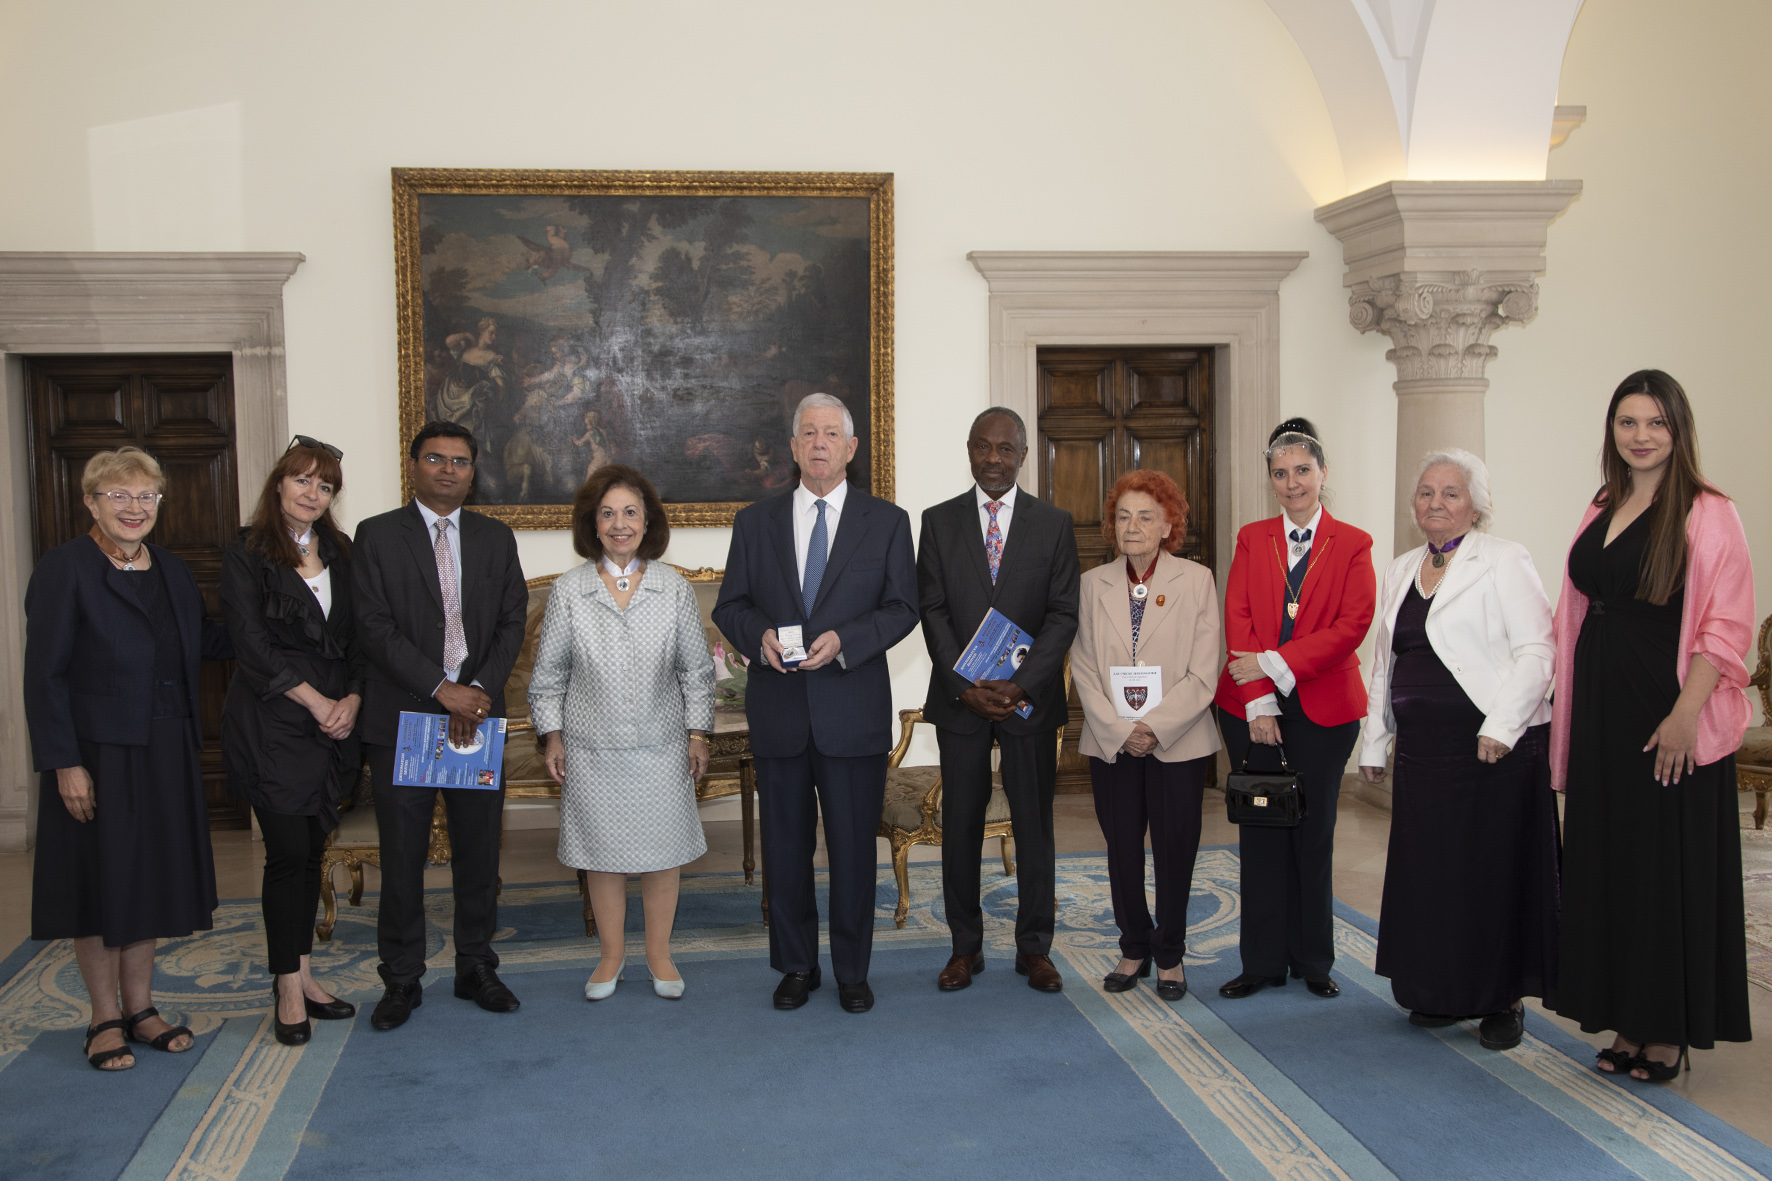 The Royal Couple of Serbia with laureates who received medals from the Diplomatic Bulletin